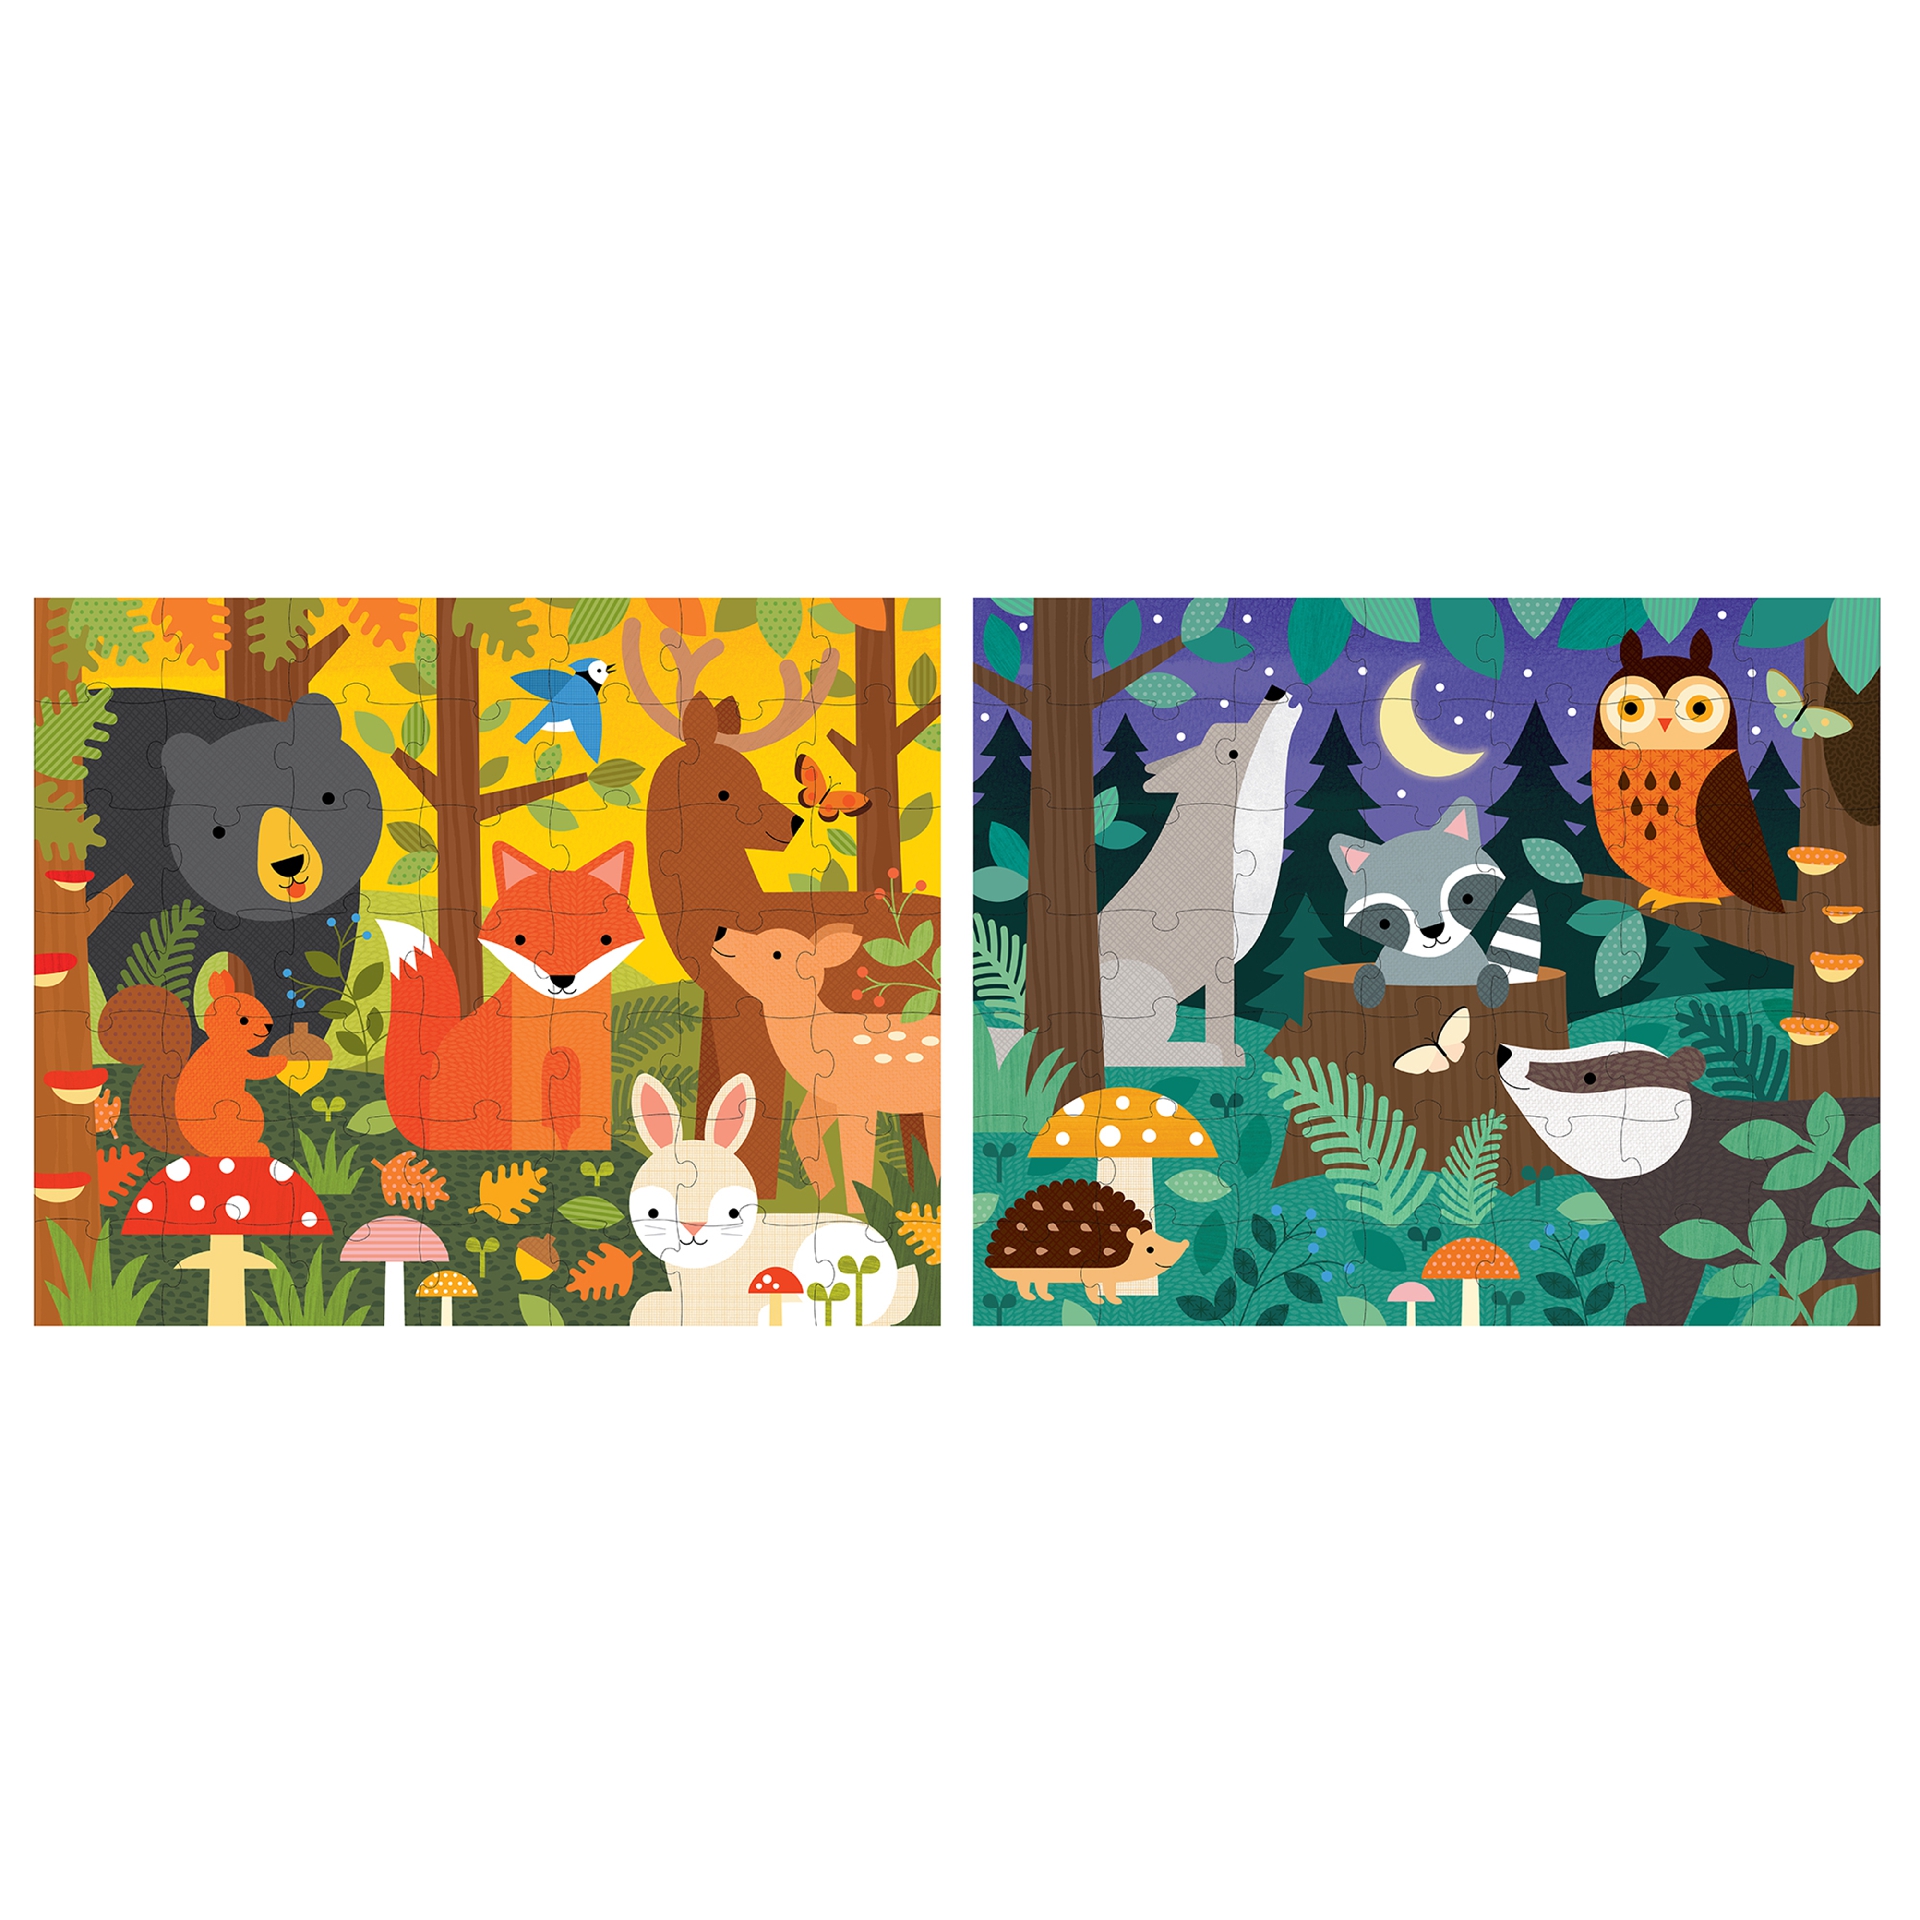 Two Sided On-the-Go Puzzle Woodland